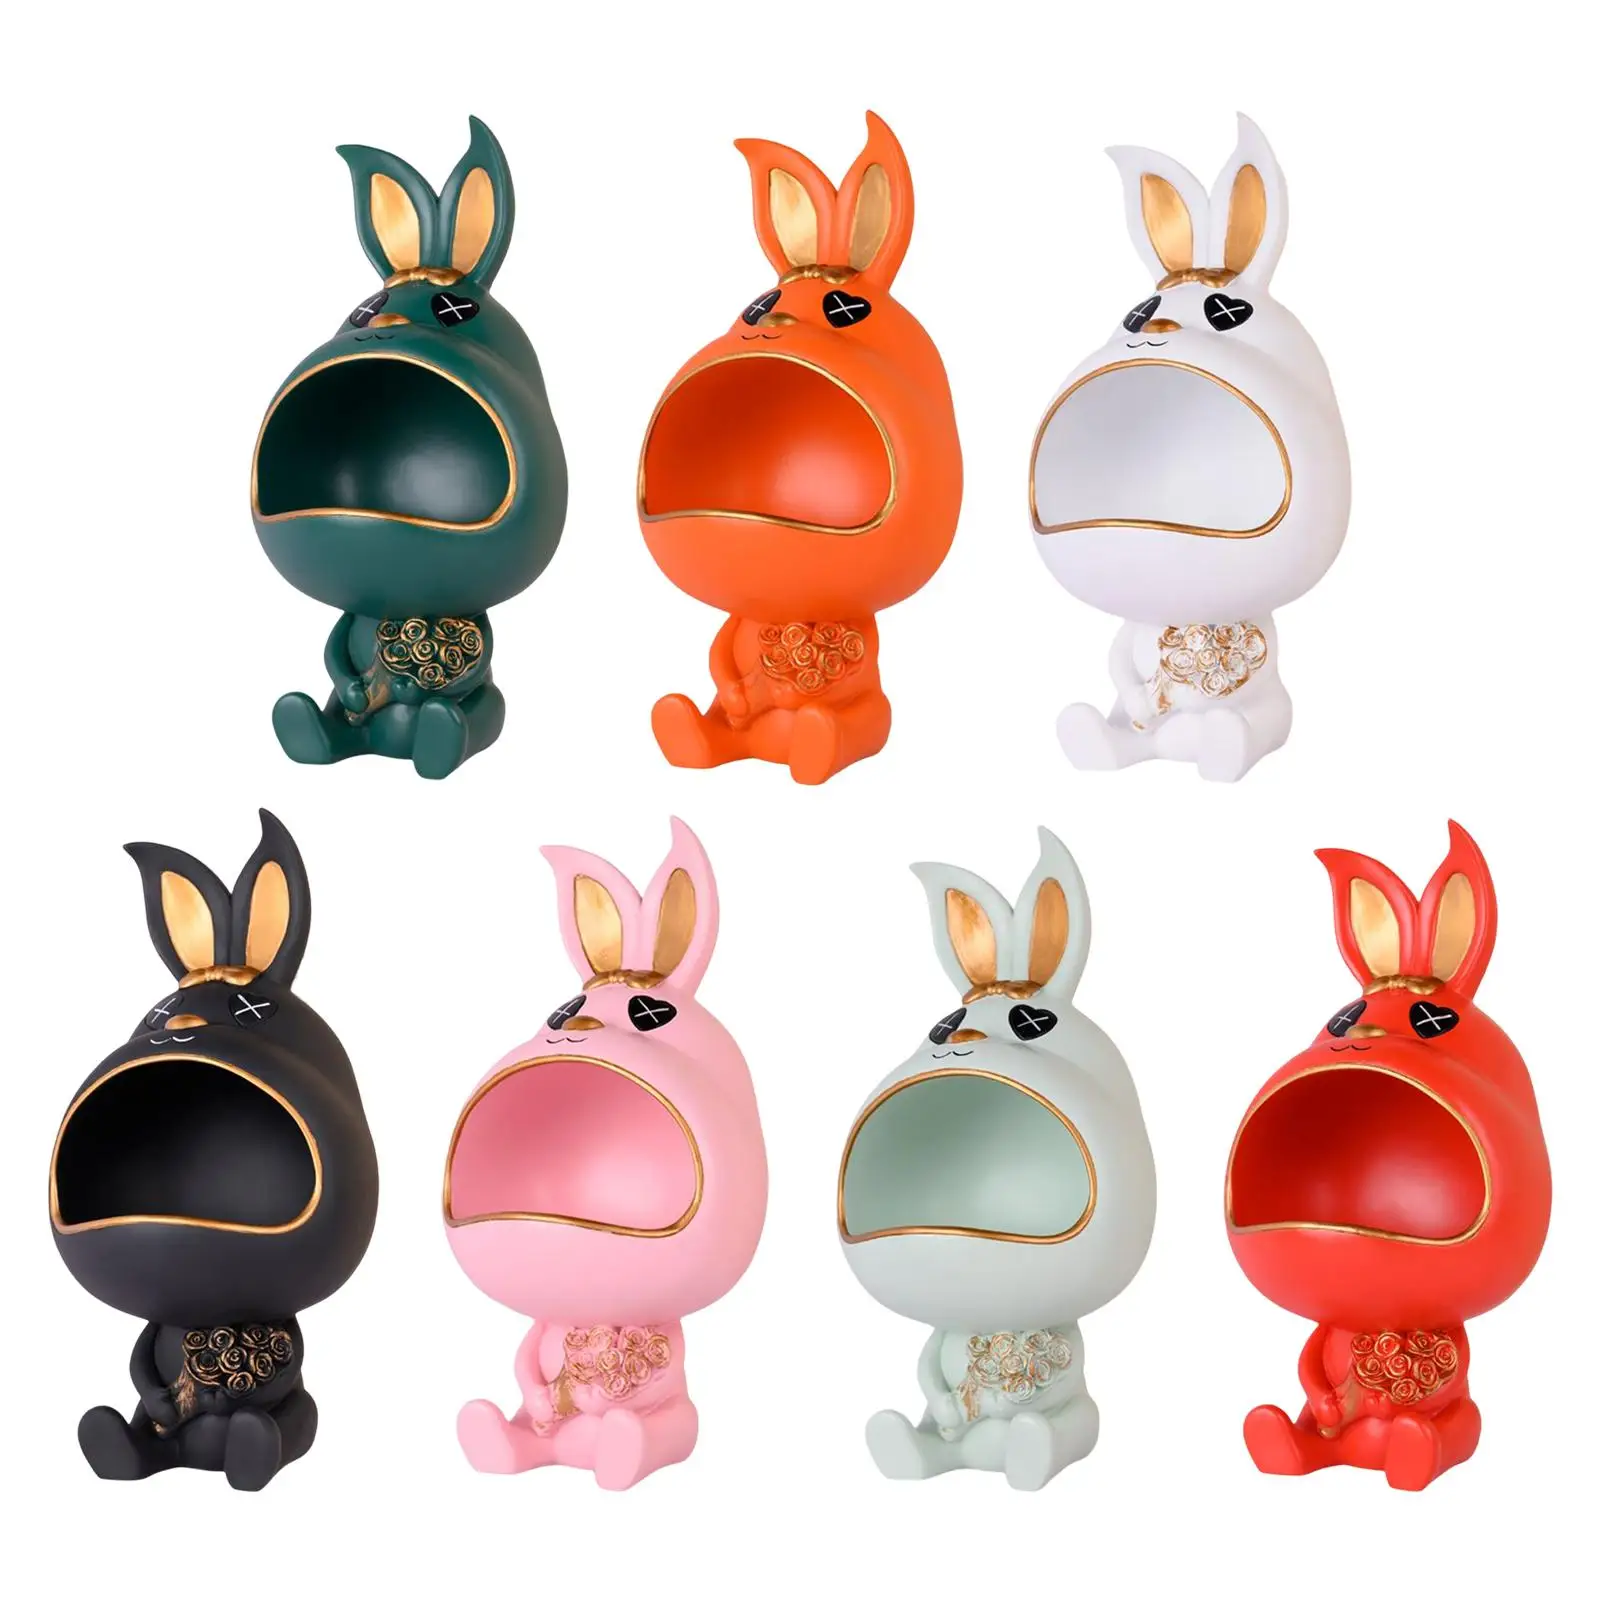 Rabbit Figurine Bunny Statue Resin Sculpture Crafts Organizer Keys Storage Box for Table Dining Room Entrance Holiday Home Decor